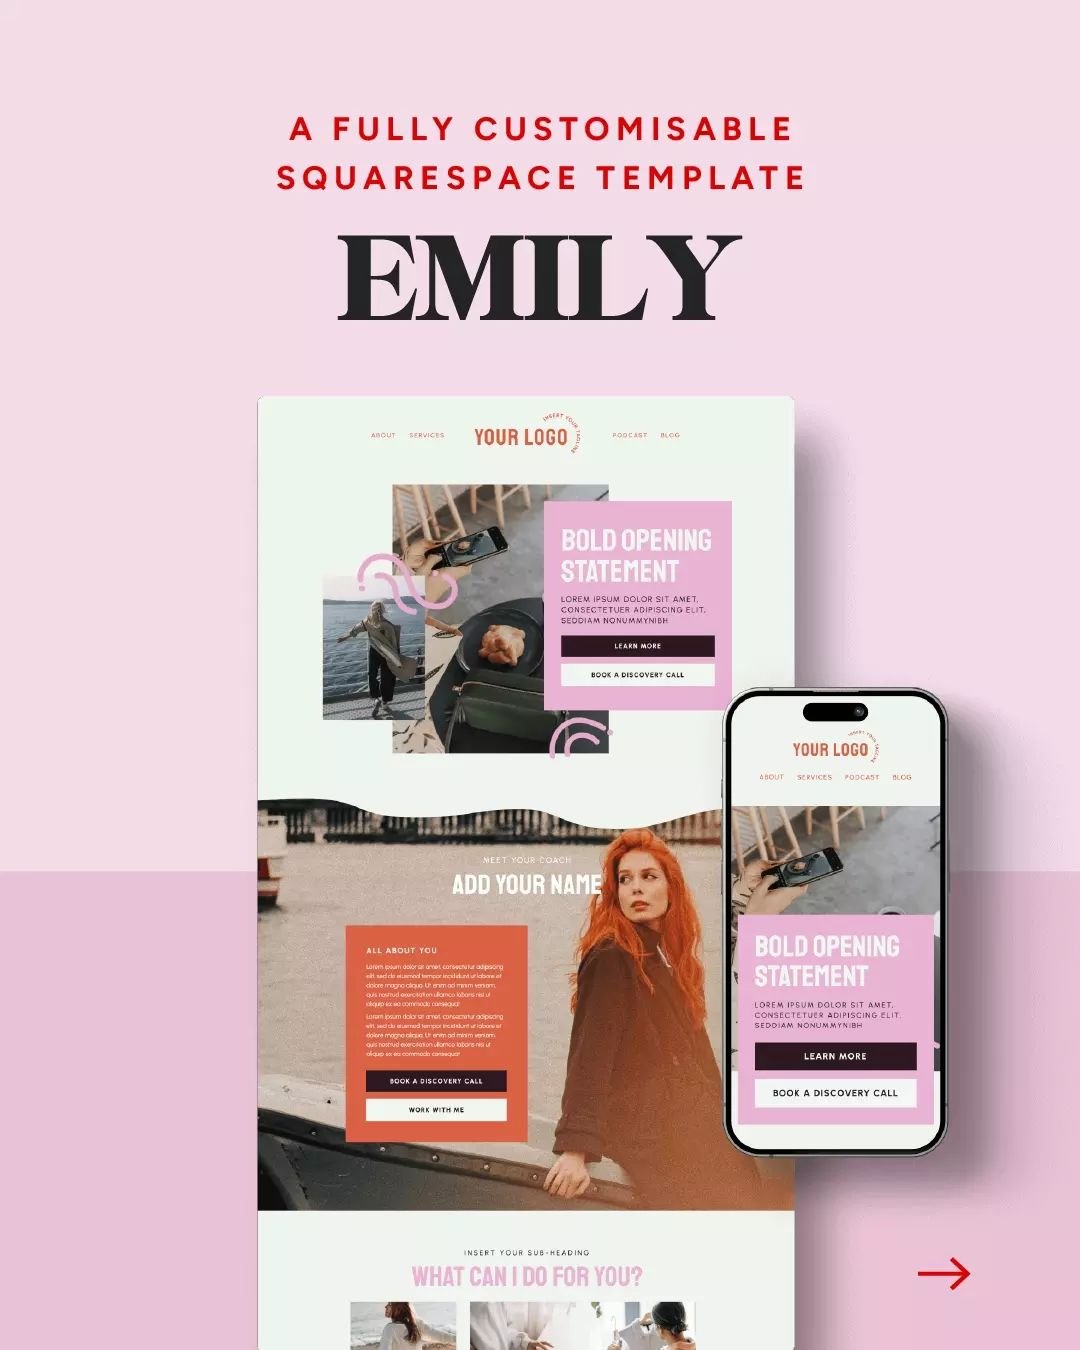 Have you met &lsquo;Emily&rsquo;? 

She&rsquo;s fun 🎉
She&rsquo;s bold🔥
And she&rsquo;s 💯 percent customisable

Basically, a godsend for brands who want a gorgeous online presence 🙌

❌ Without the price tag of a custom website
❌ Or the pain of DI